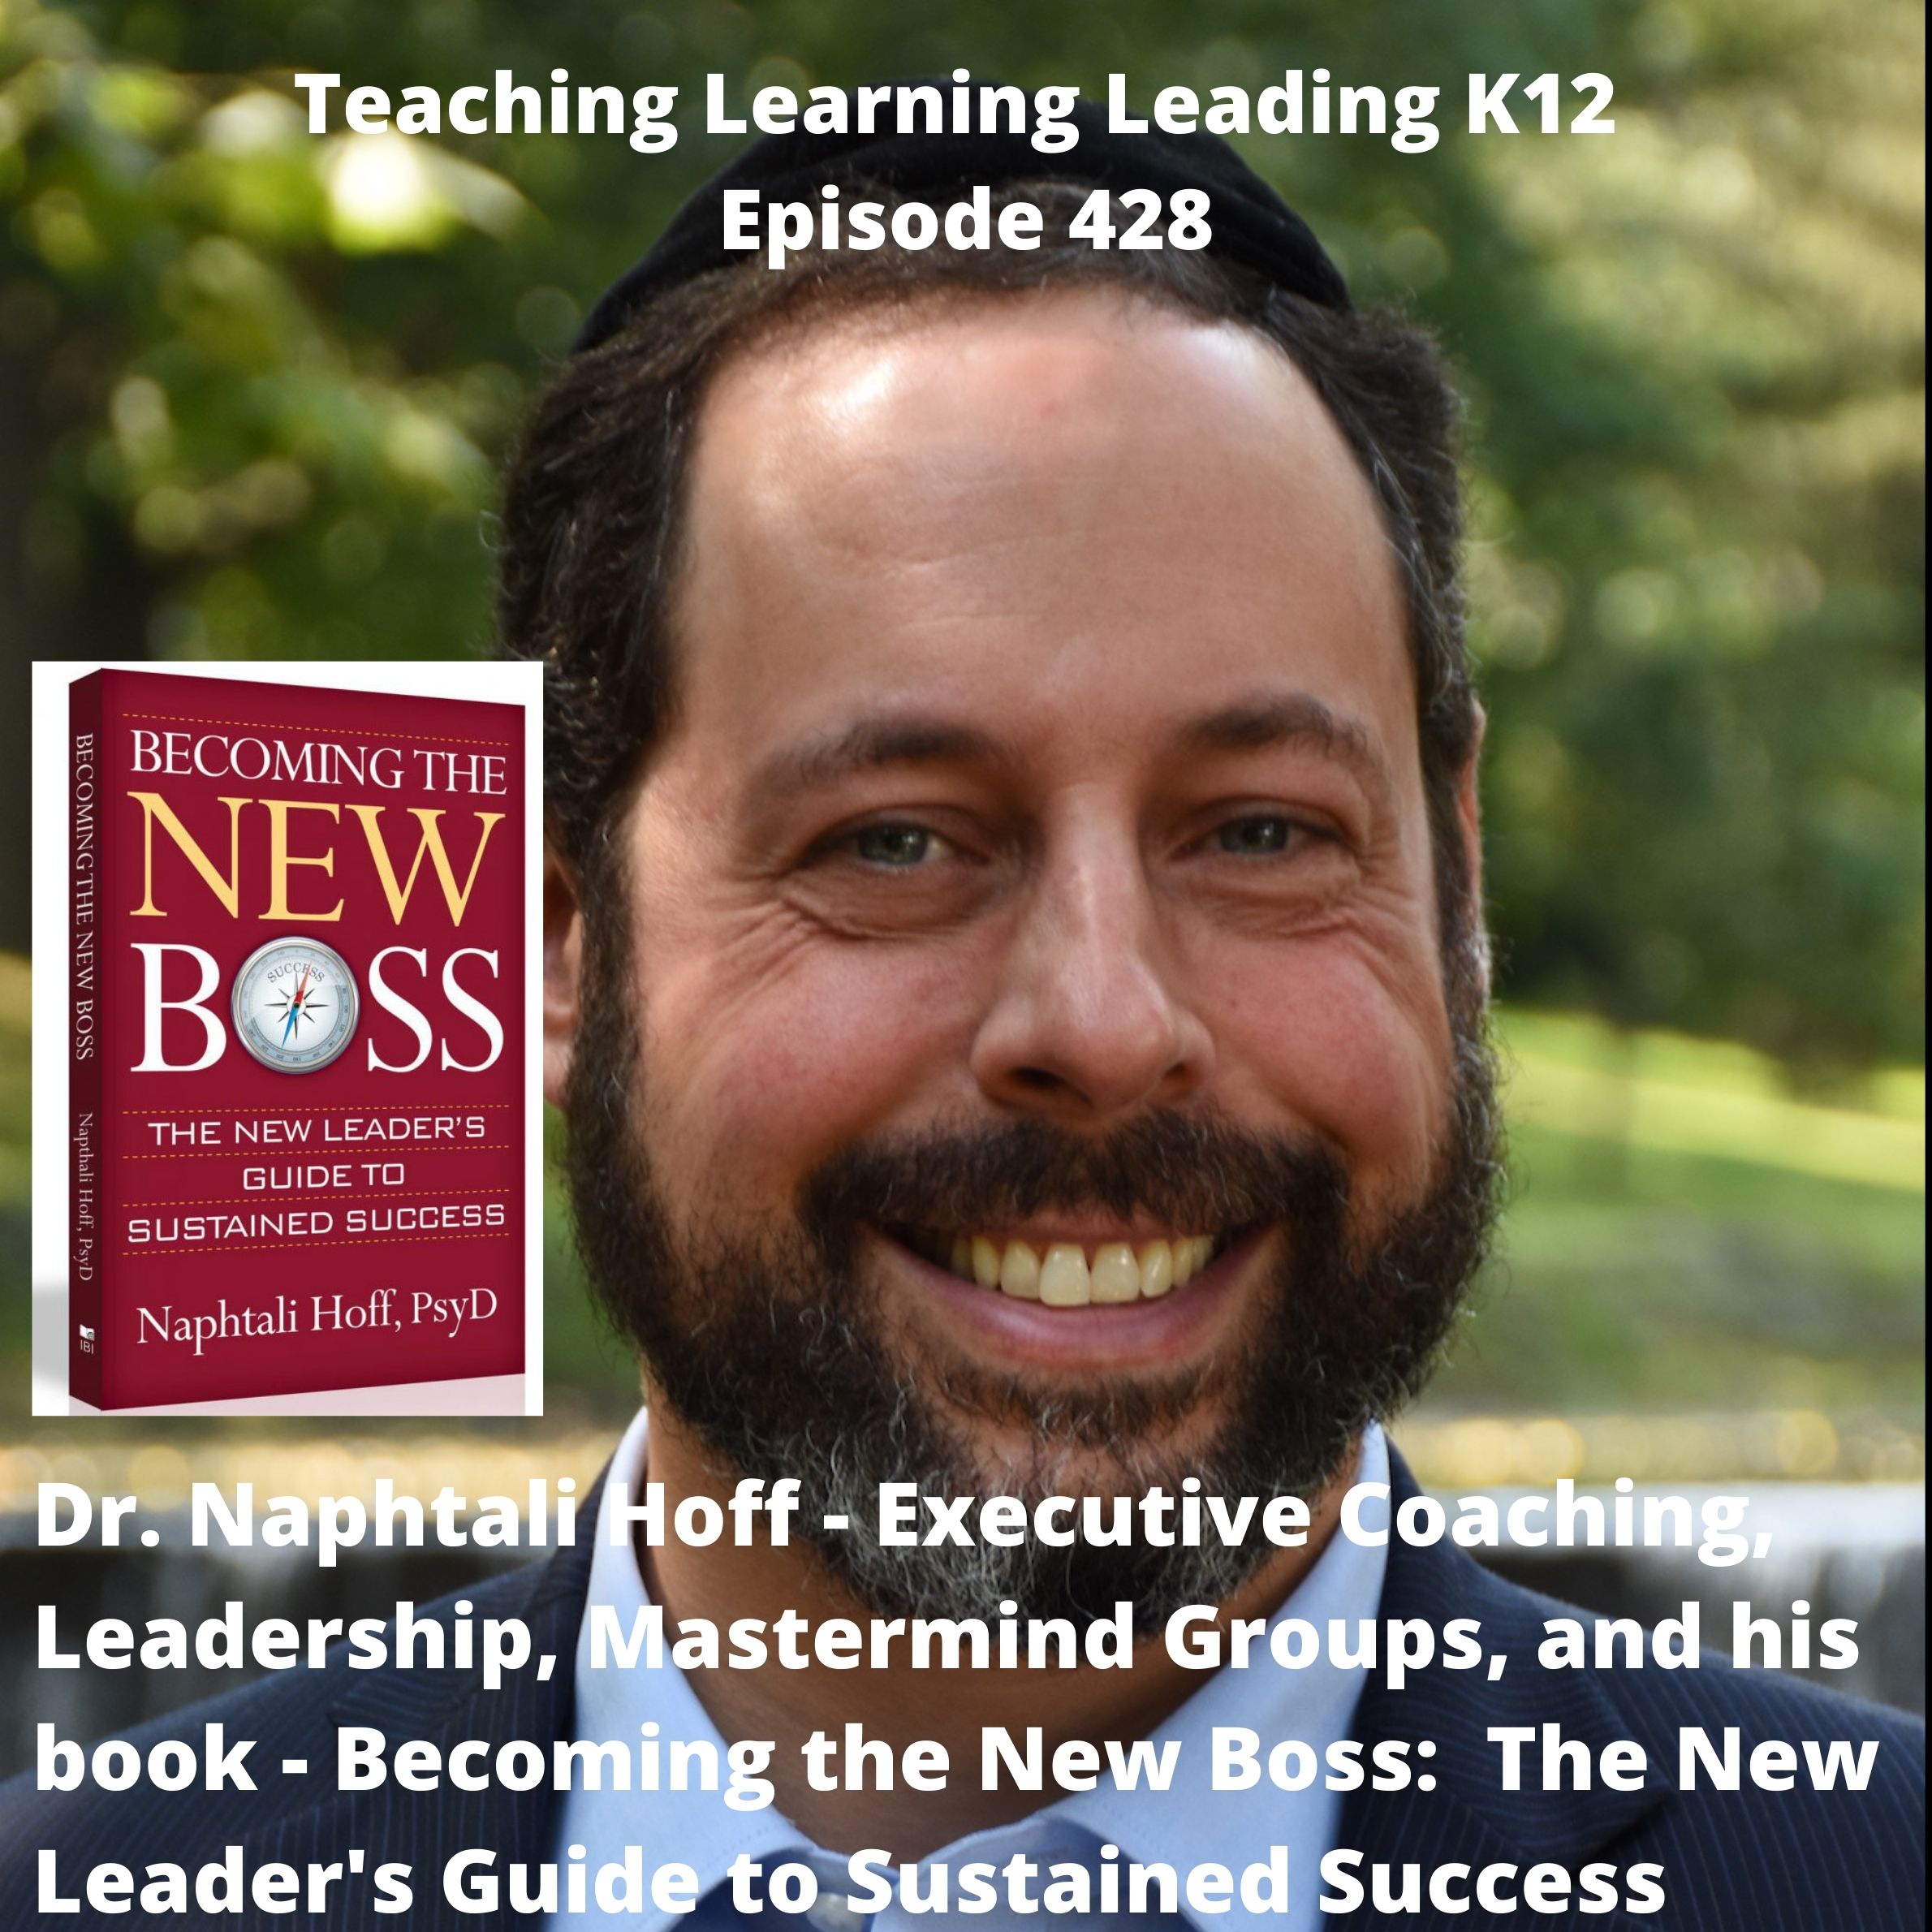 Dr. Naphtali Hoff - Executive Coaching, Leadership, Mastermind Groups, and his book - Becoming the New Boss: The New Leader‘s Guide to Sustained Success - 428 Image